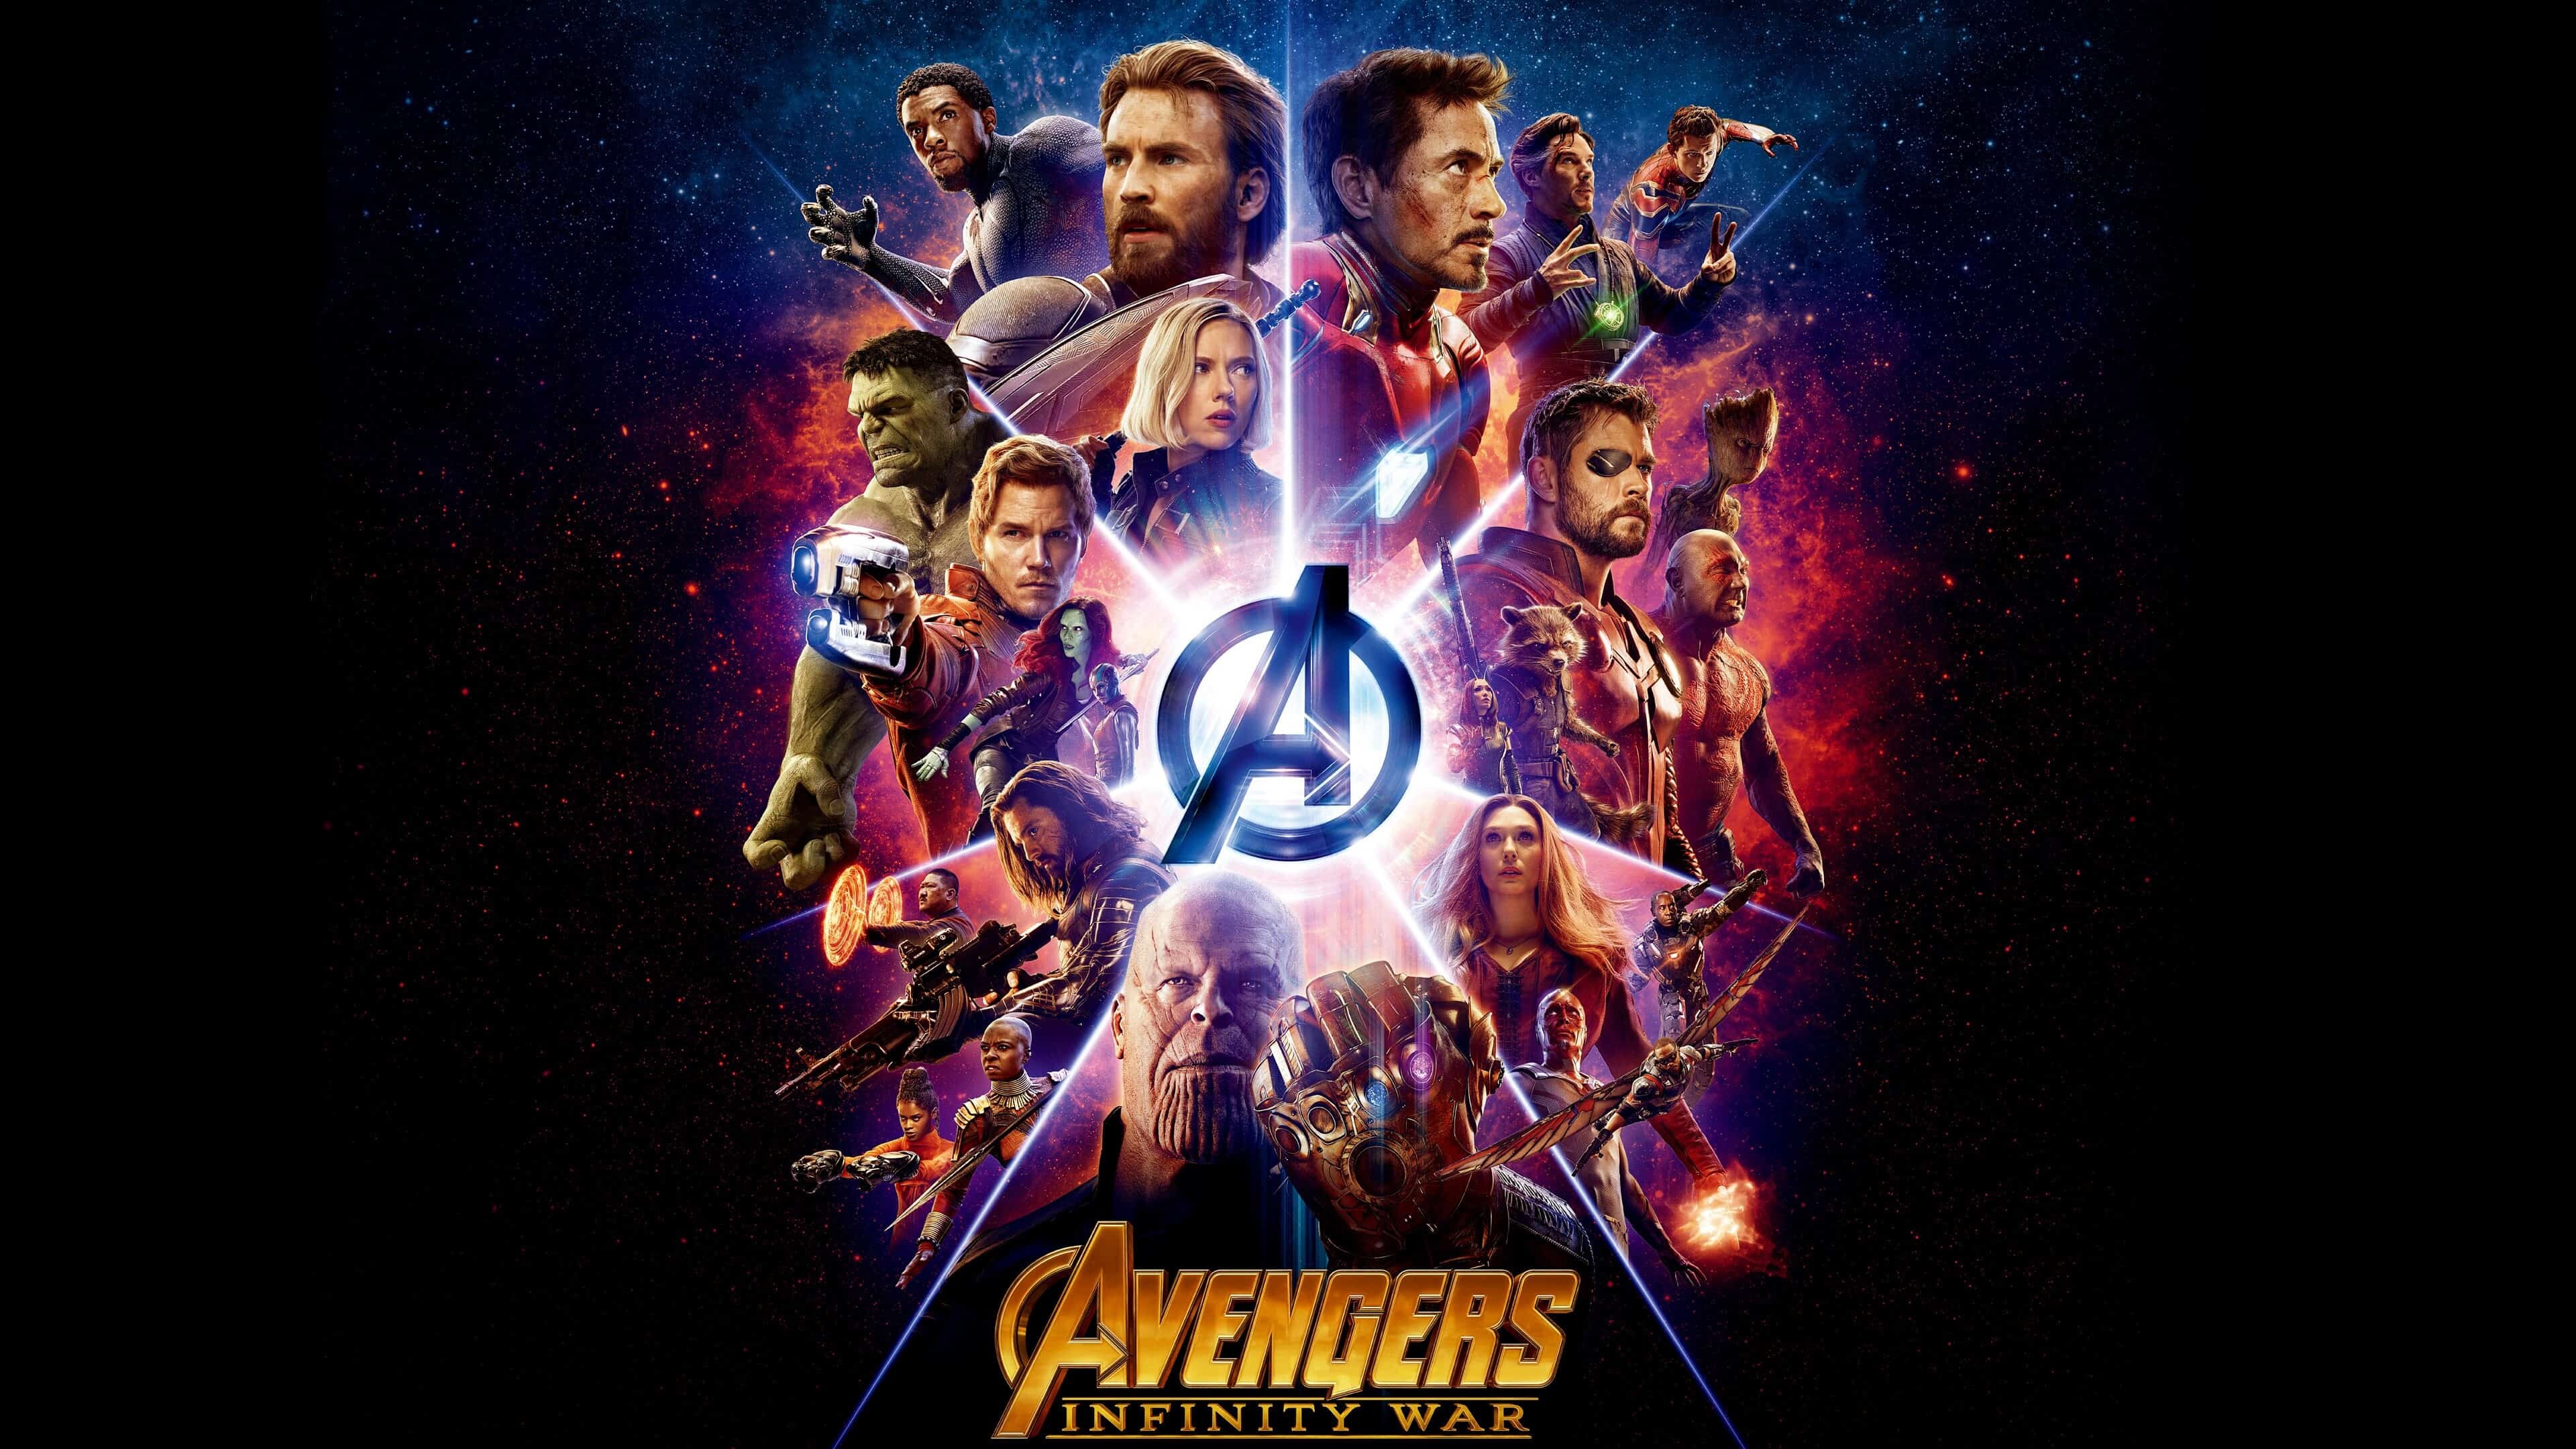 Avengers: Infinity War, Poster, The 19th Film In The Marvel Cinematic Universe. 3840x2160 4K Wallpaper.